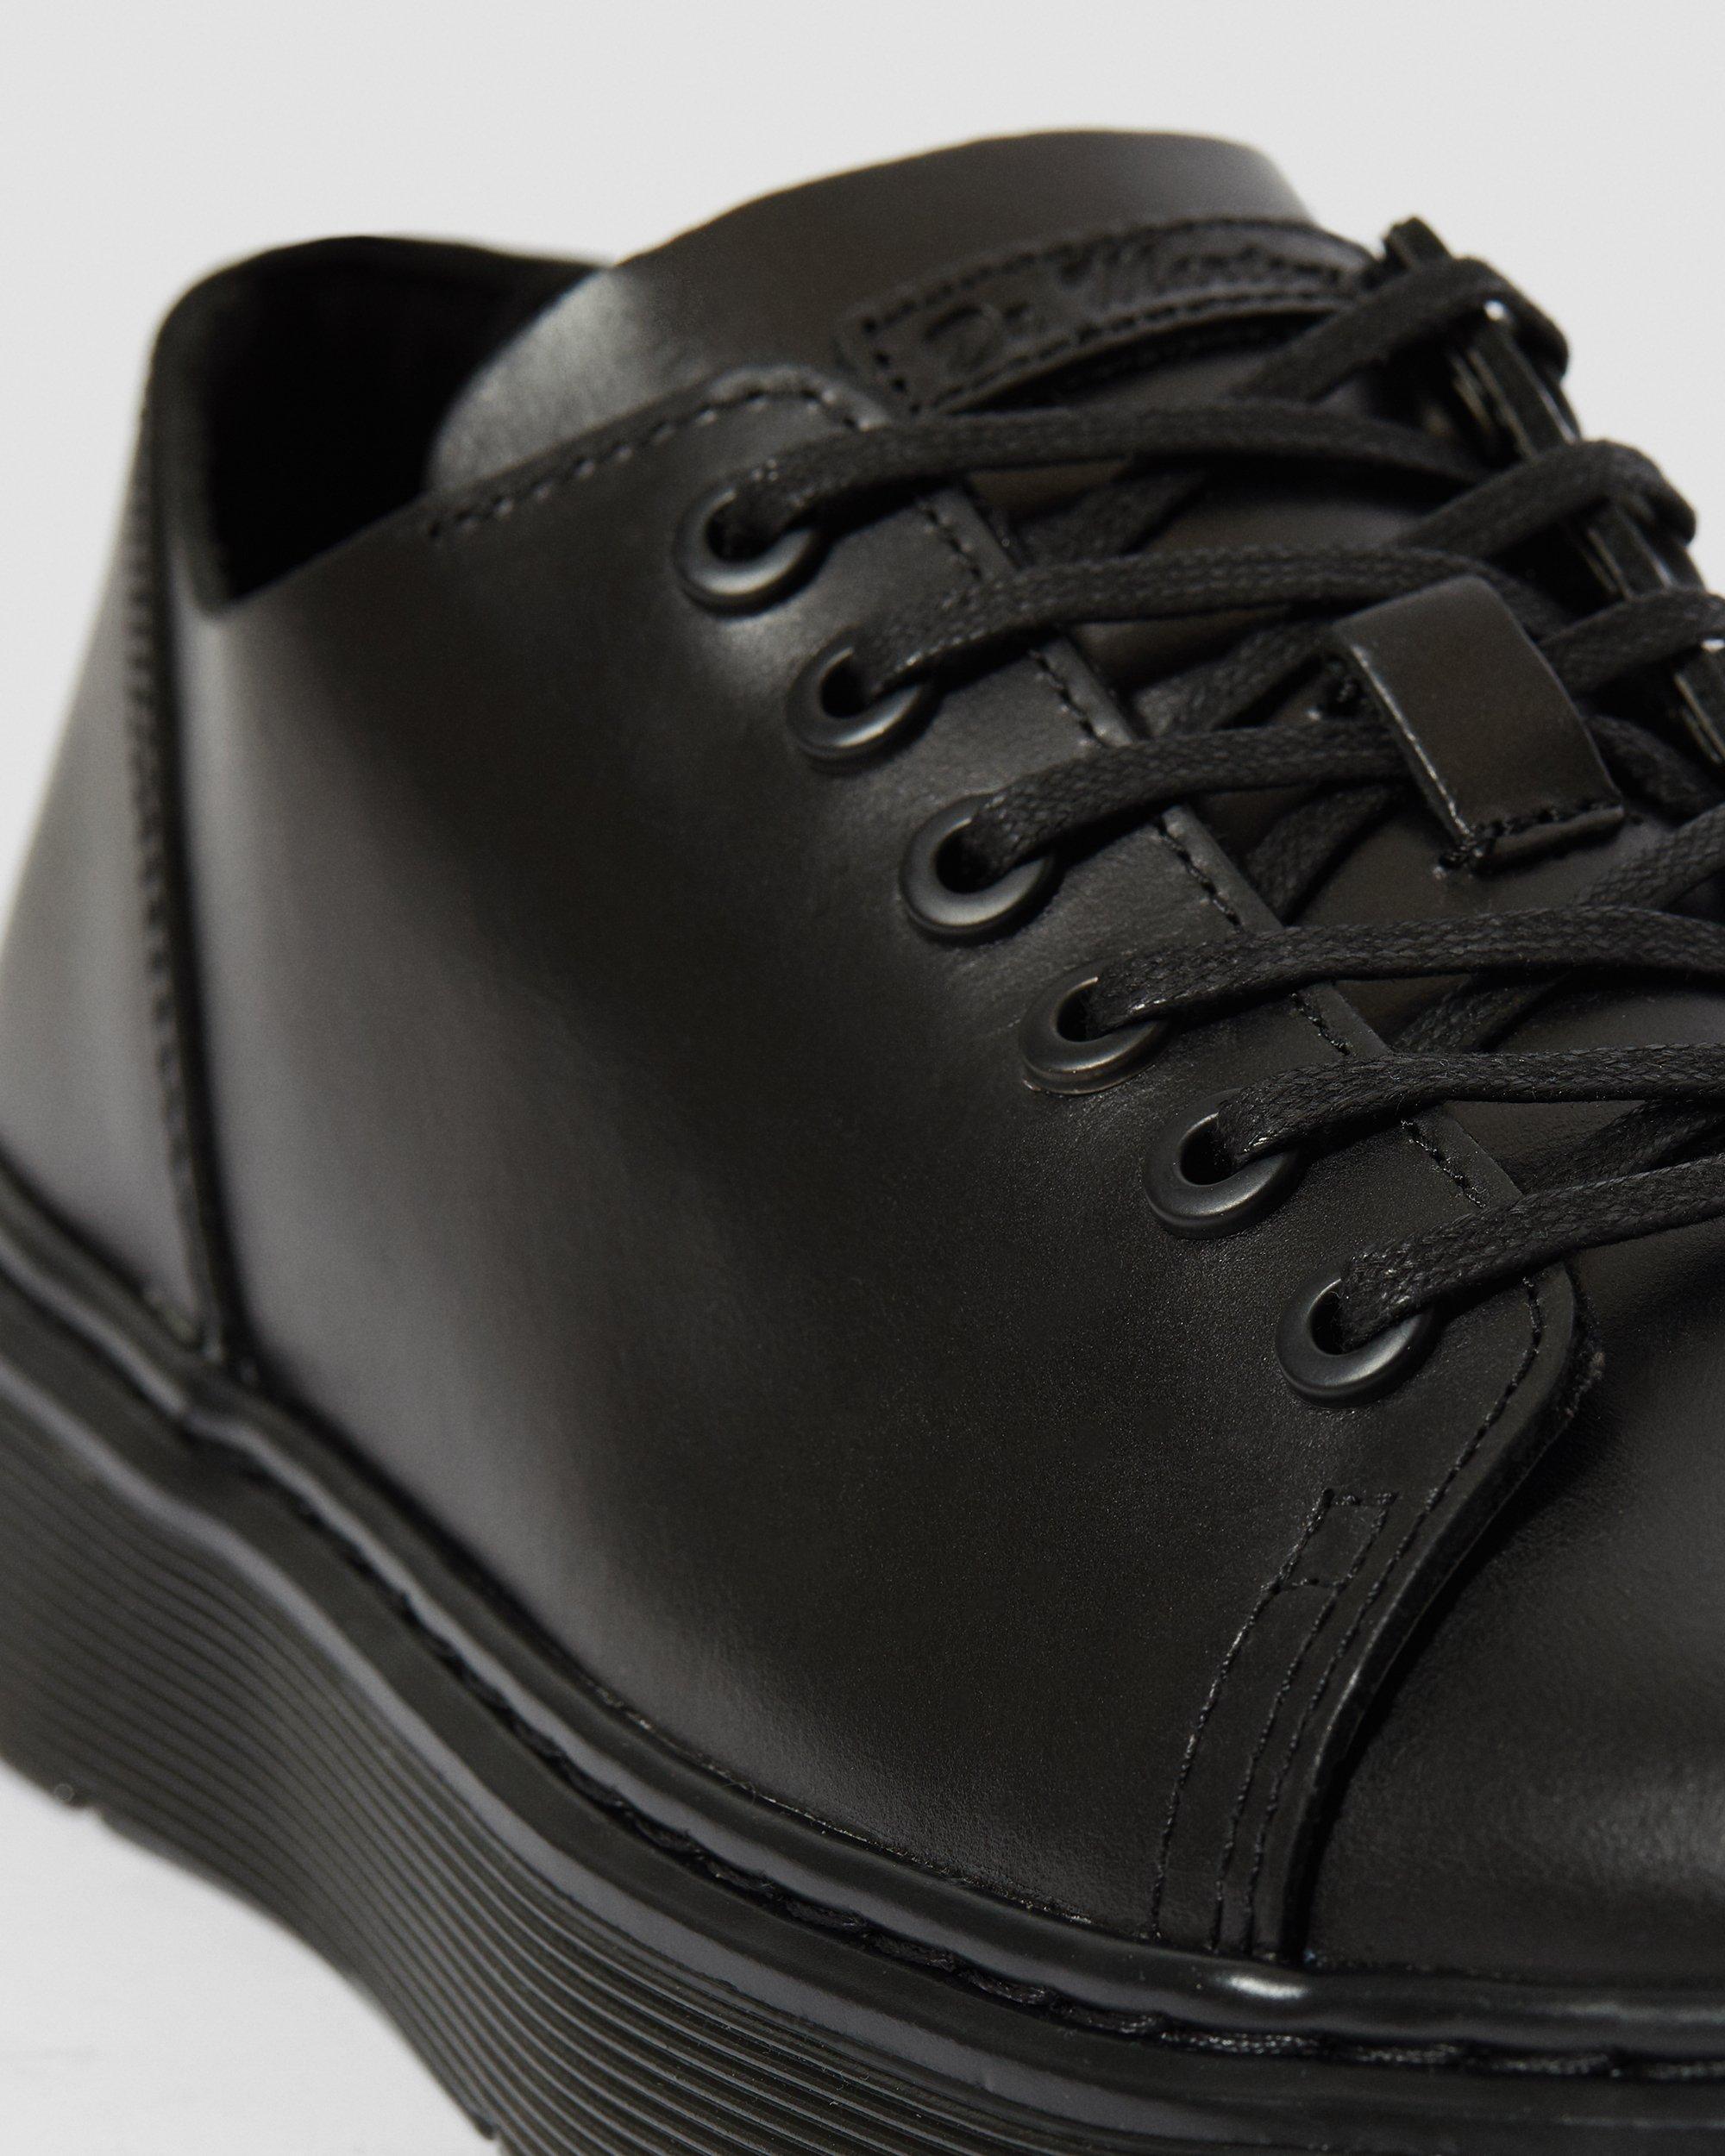 Dr. Martens Dante Brando Leather Casual Shoes in Black for Men - Lyst